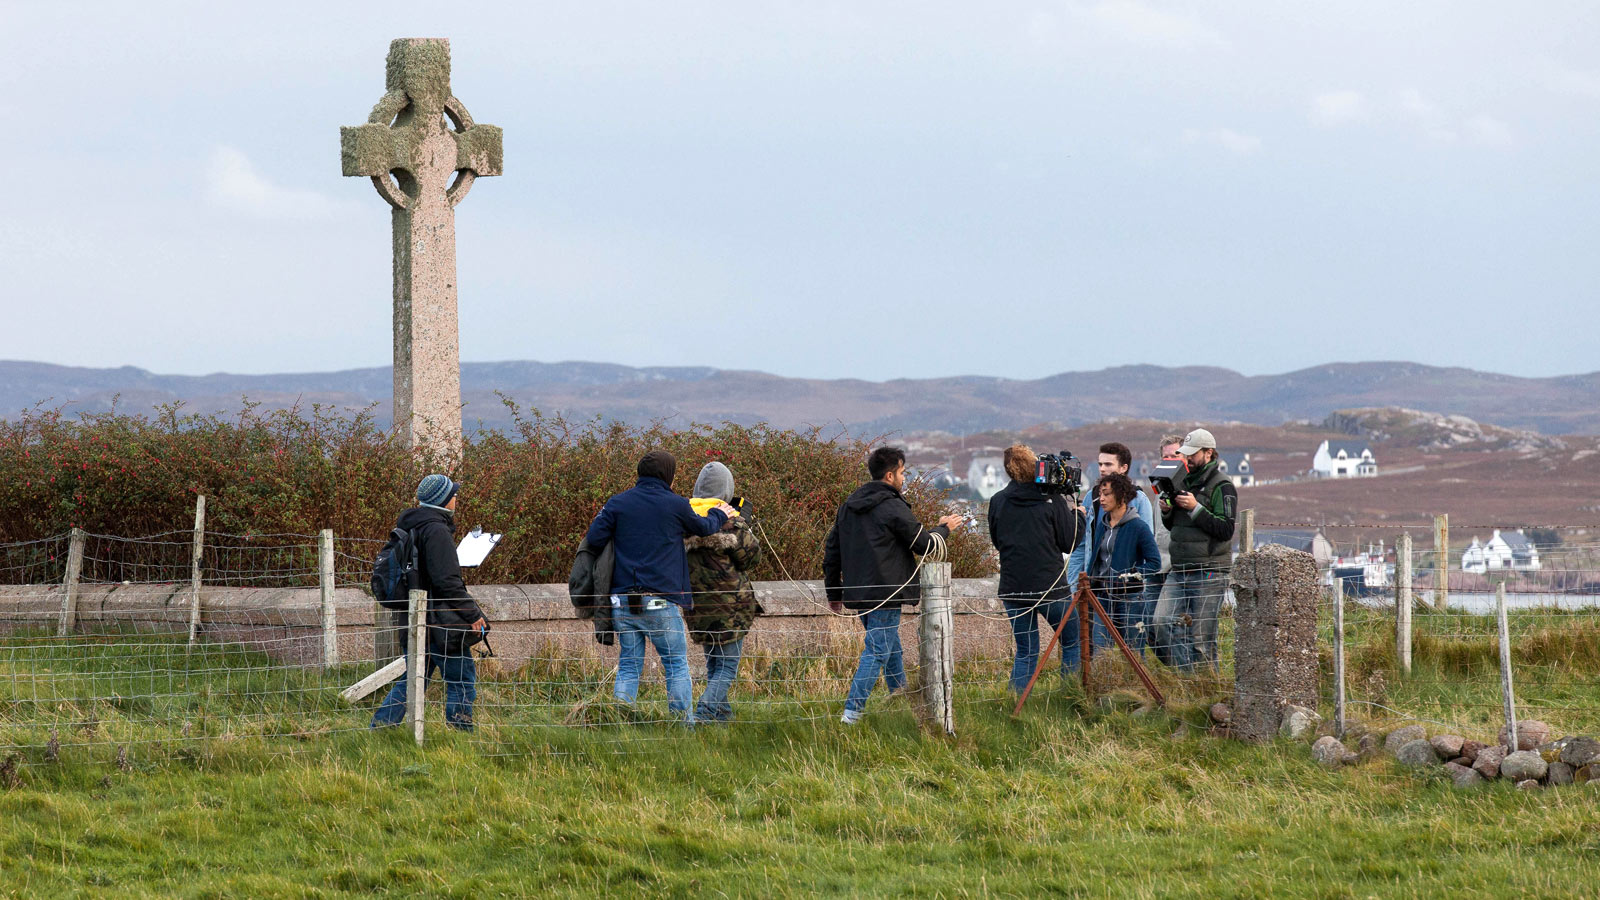 Iona crew filming near a stone cross outdoors